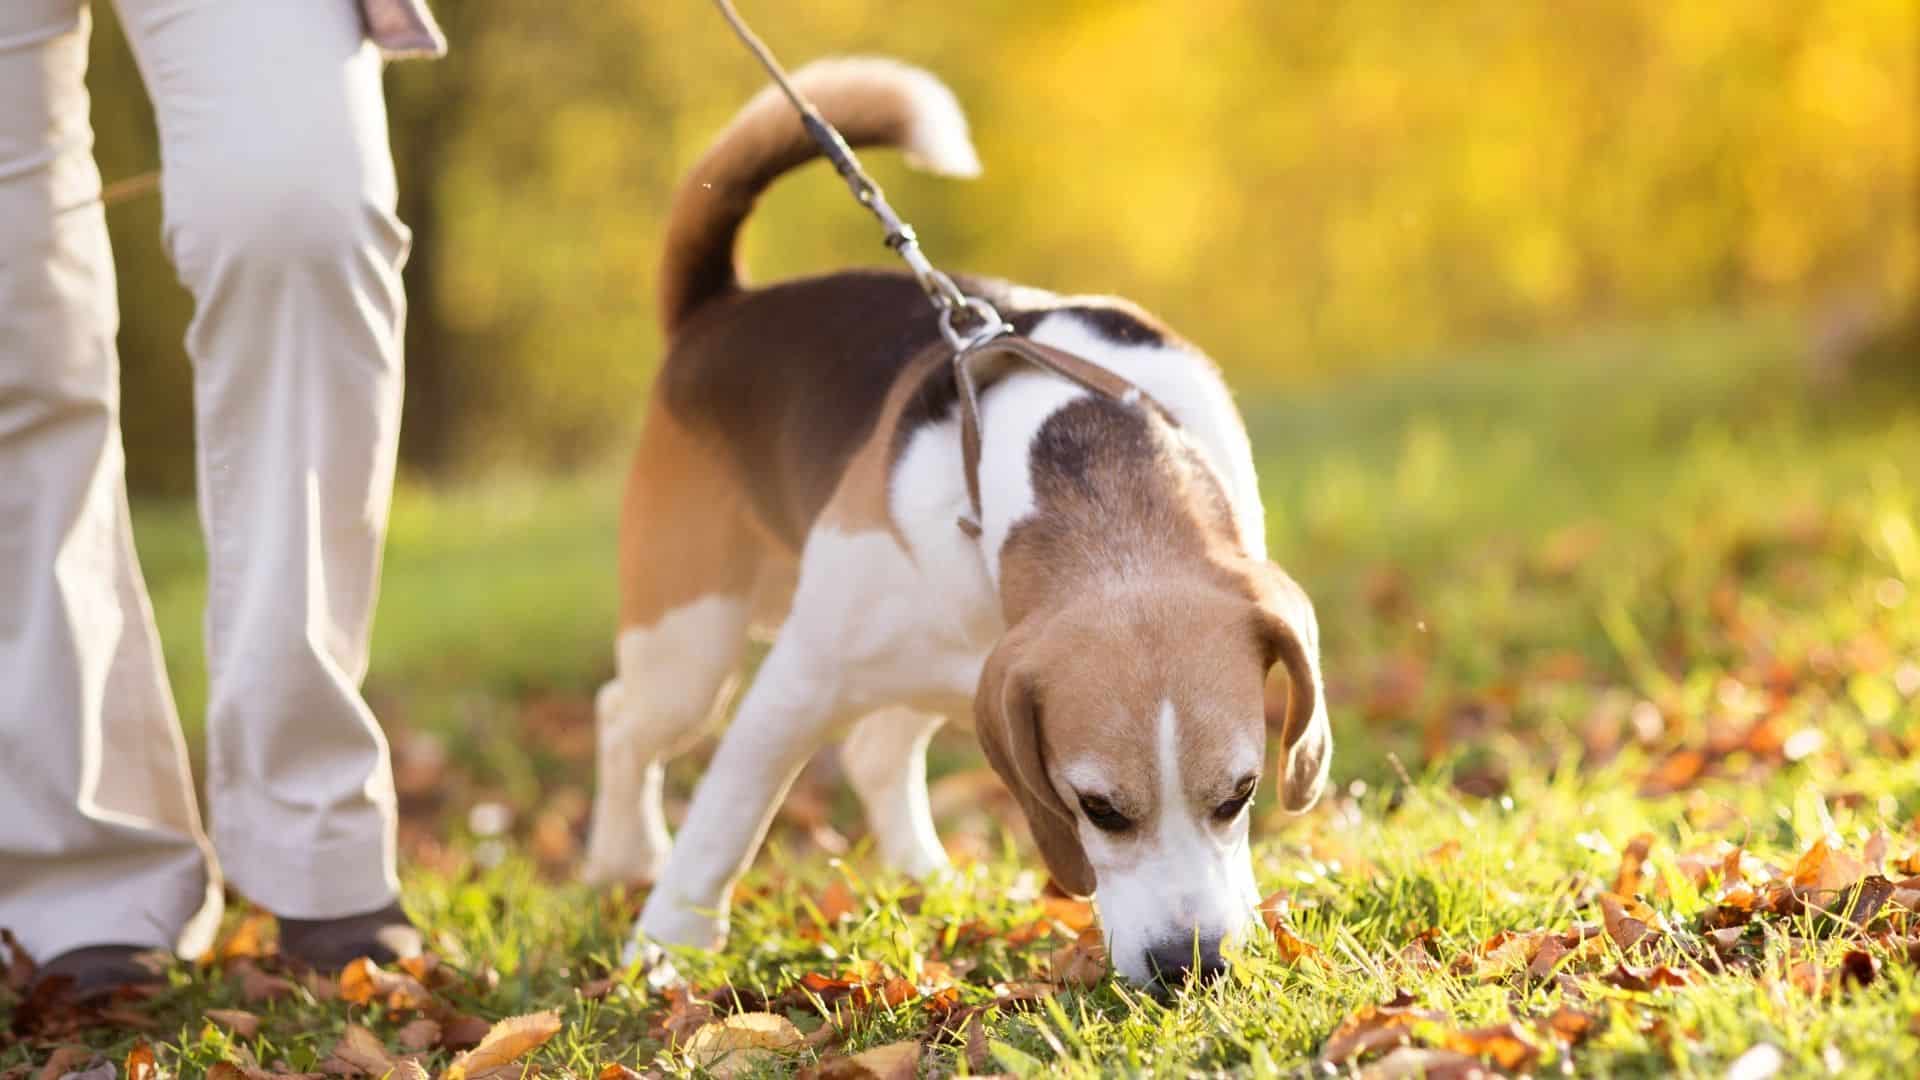 The Complete Guide to Dog Walking